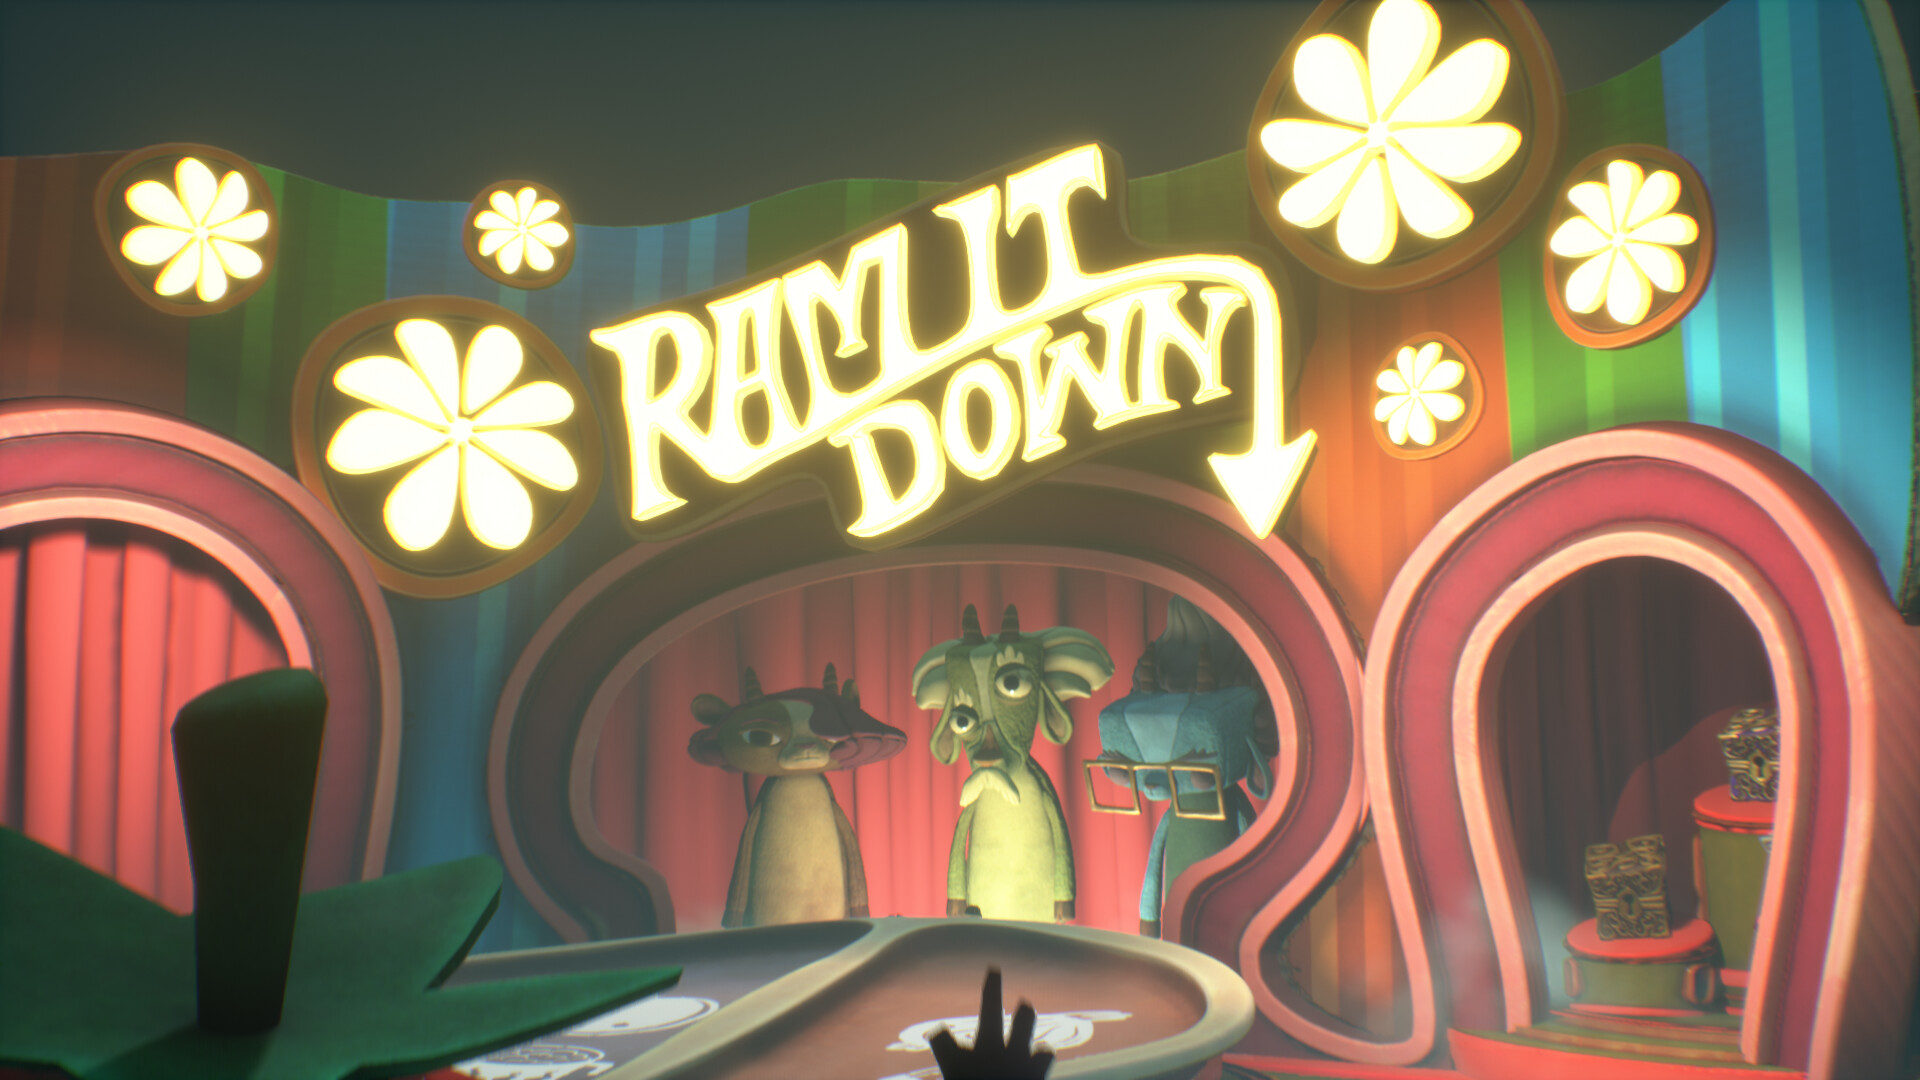 Psychonauts 2: The players are solving puzzles themed around the ideas of regret, failure, and healing. 1920x1080 Full HD Background.